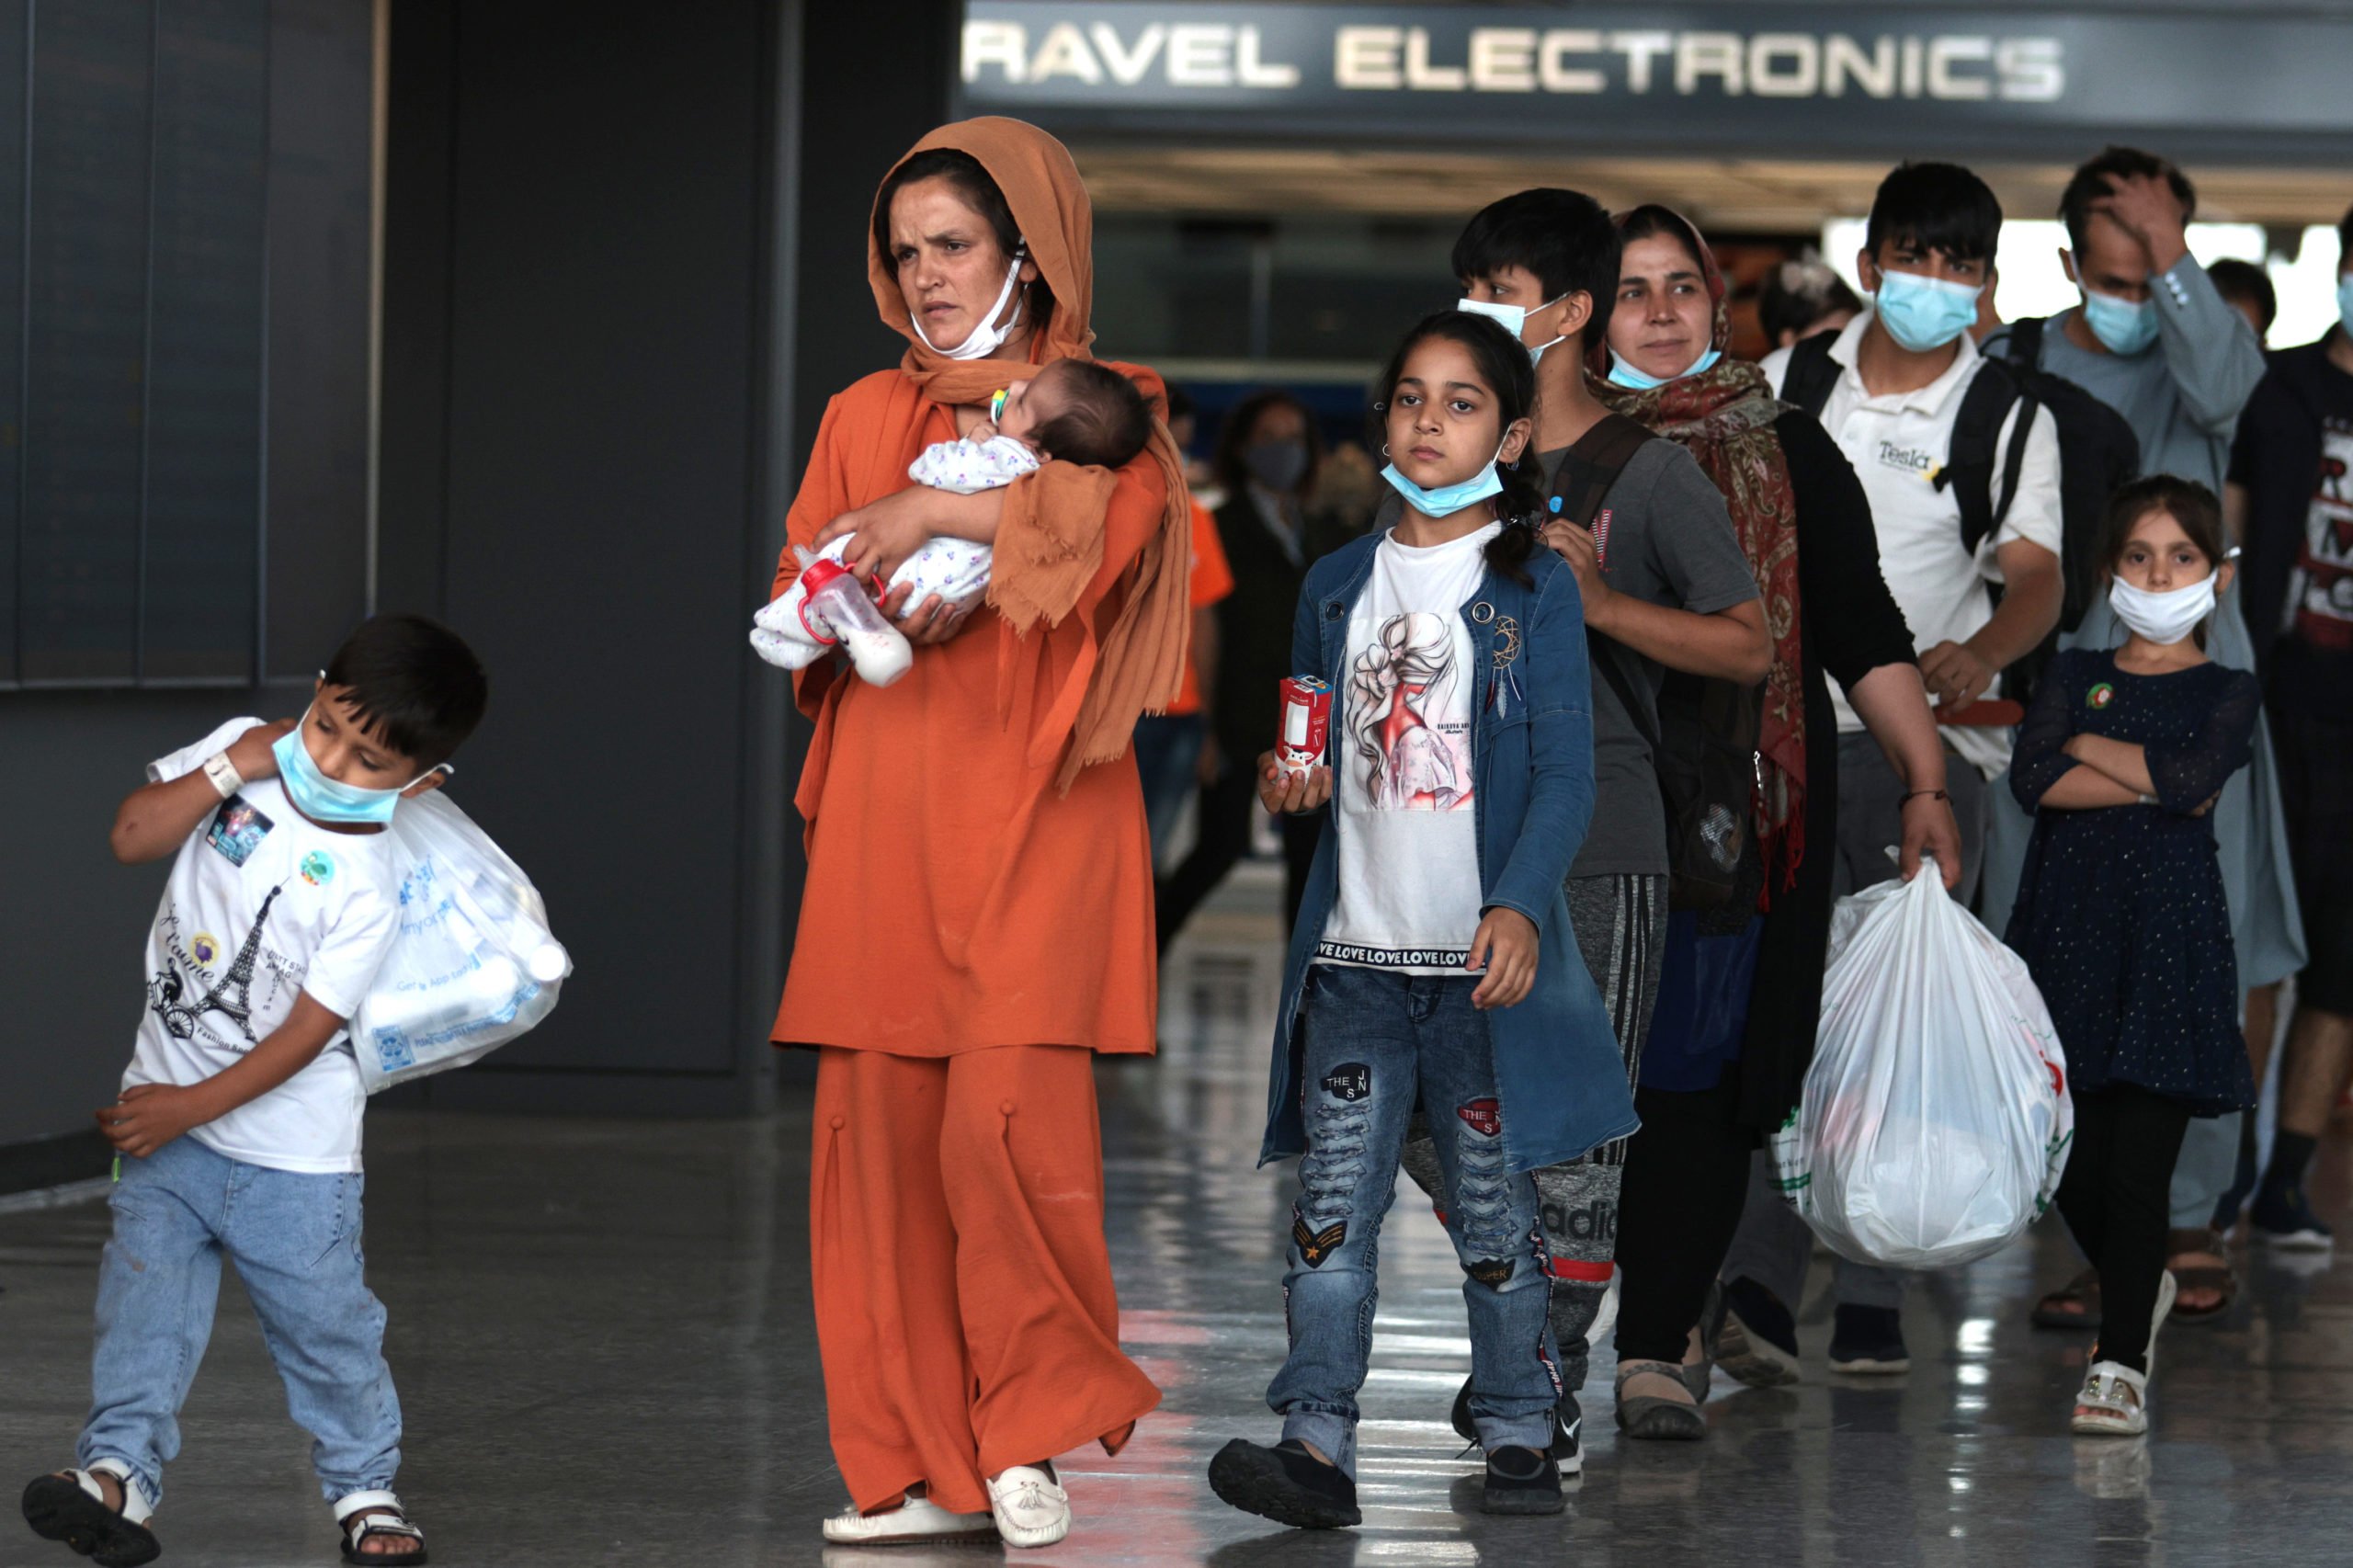 Refugees walk through the departure terminal to a bus at Dulles International Airport after being evacuated from Kabul following the Taliban takeover of Afghanistan on August 31, 2021 in Dulles, Virginia. (Photo by Anna Moneymaker/Getty Images)